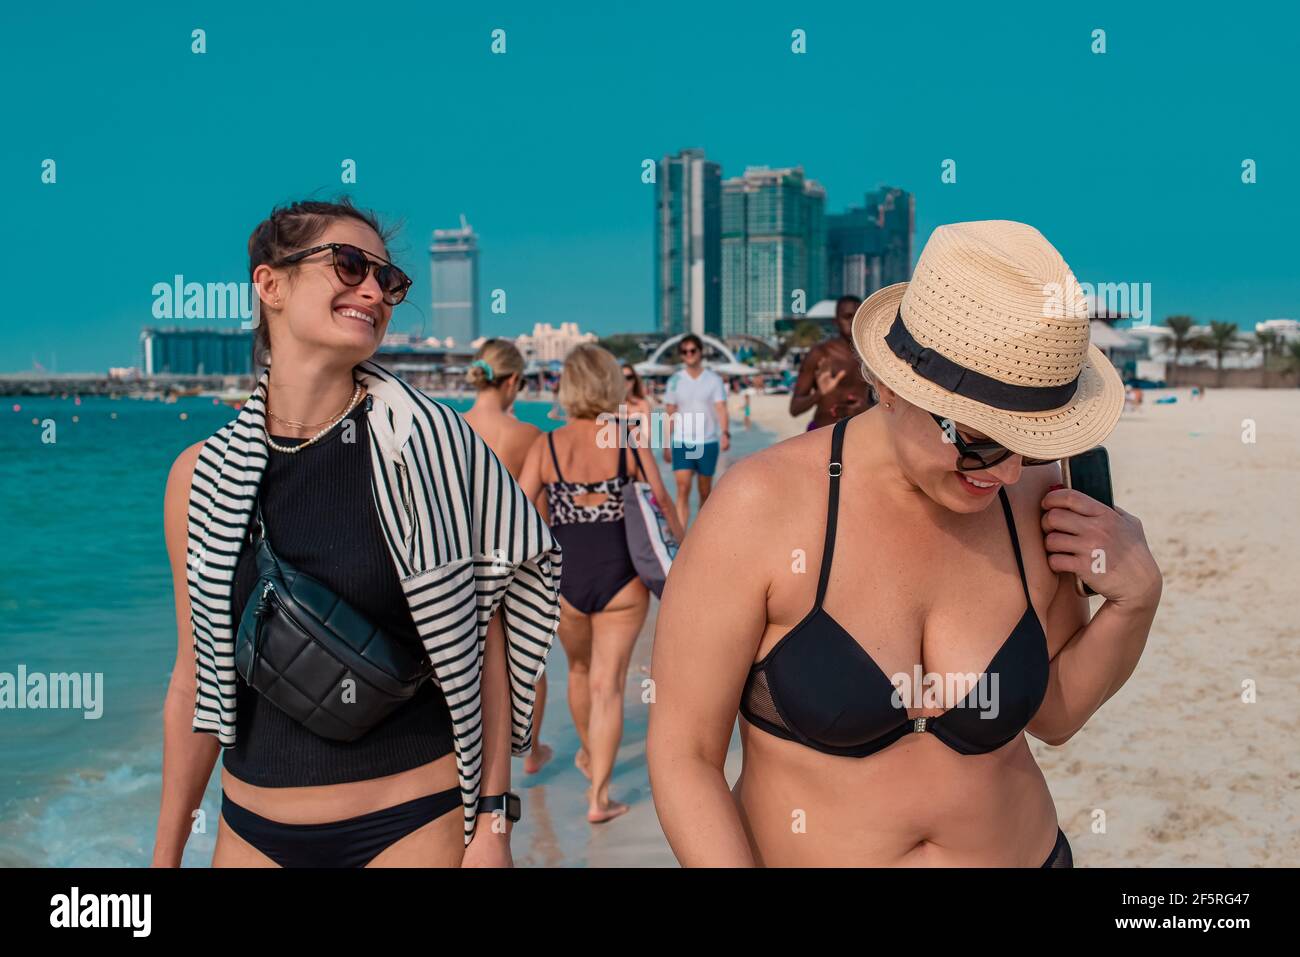 pretty women enjoying life on vacation at seaside walking and laughing Stock Photo